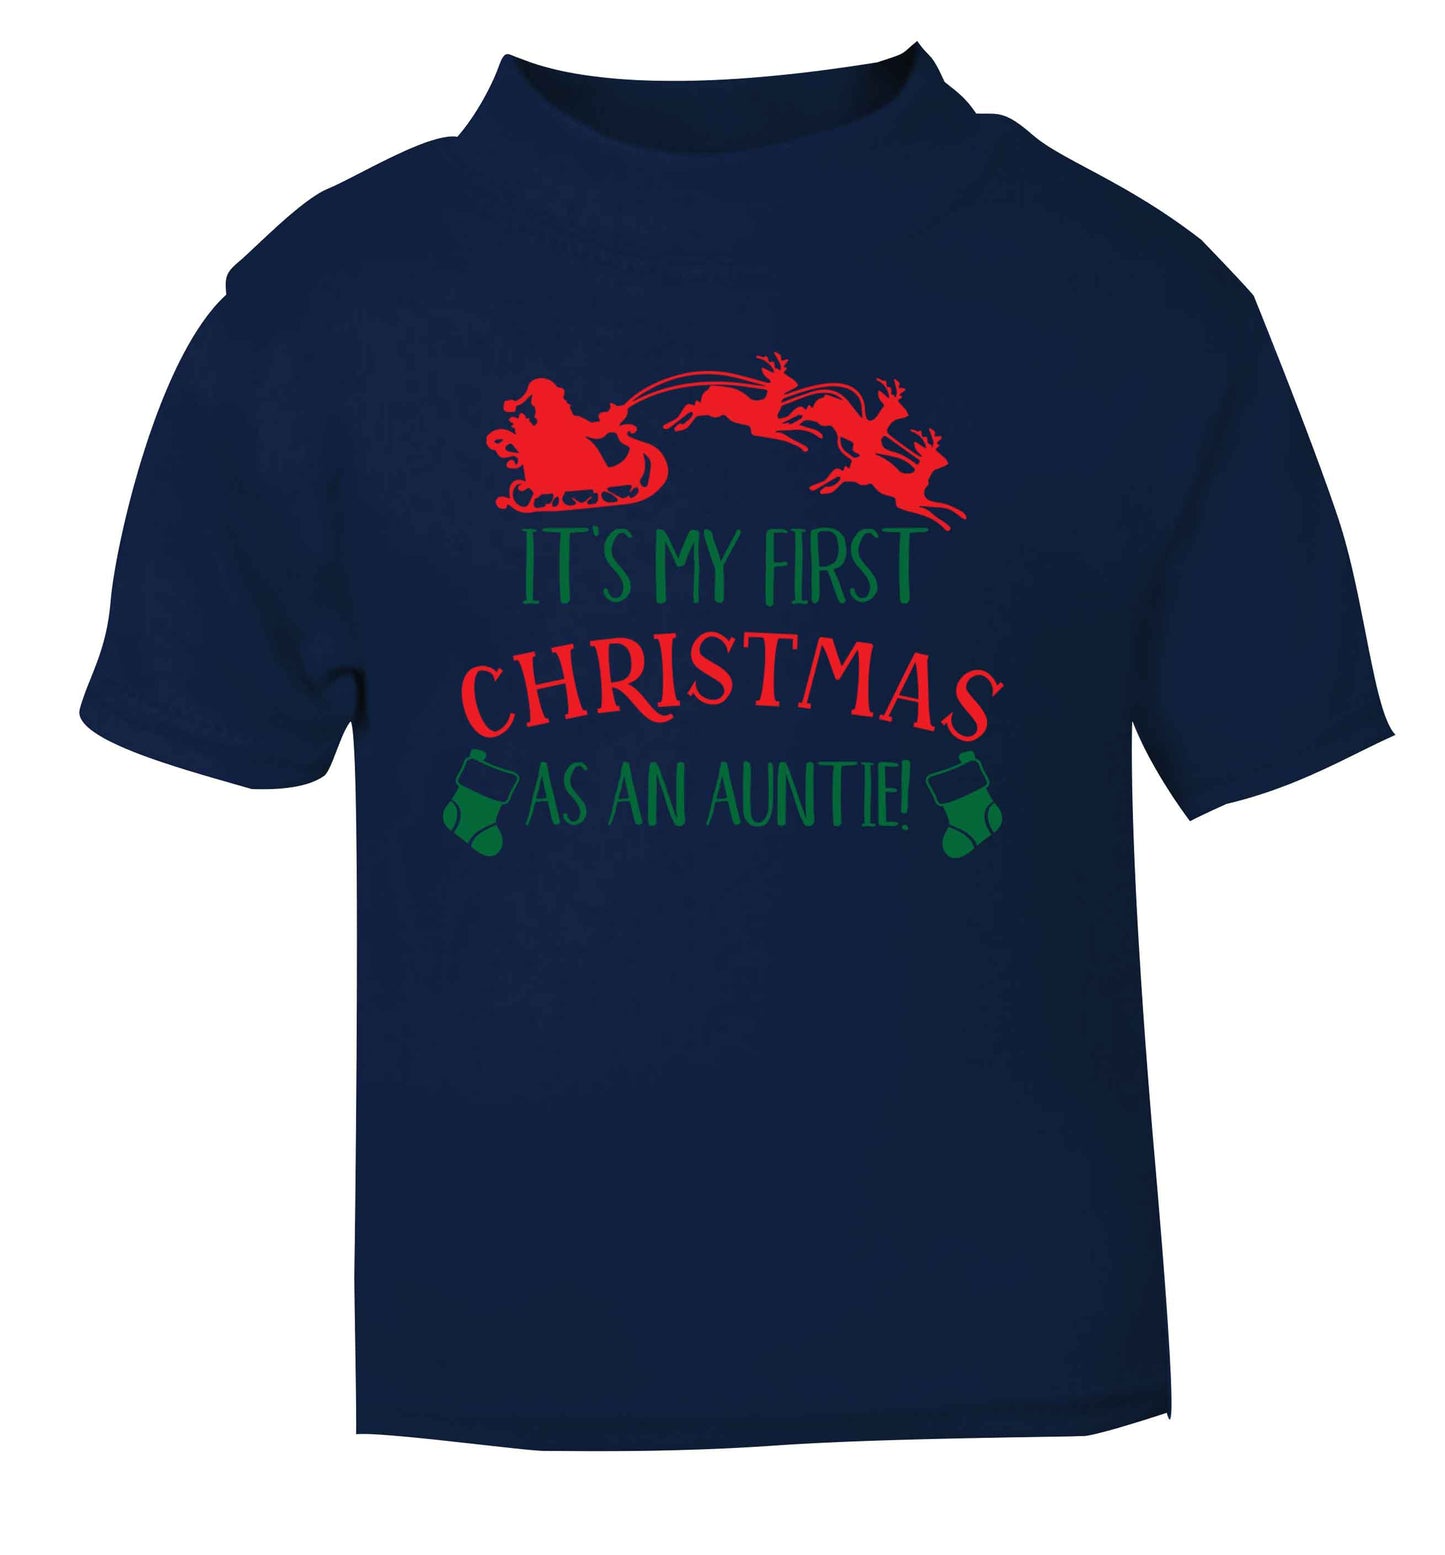 It's my first Christmas as an auntie! navy Baby Toddler Tshirt 2 Years